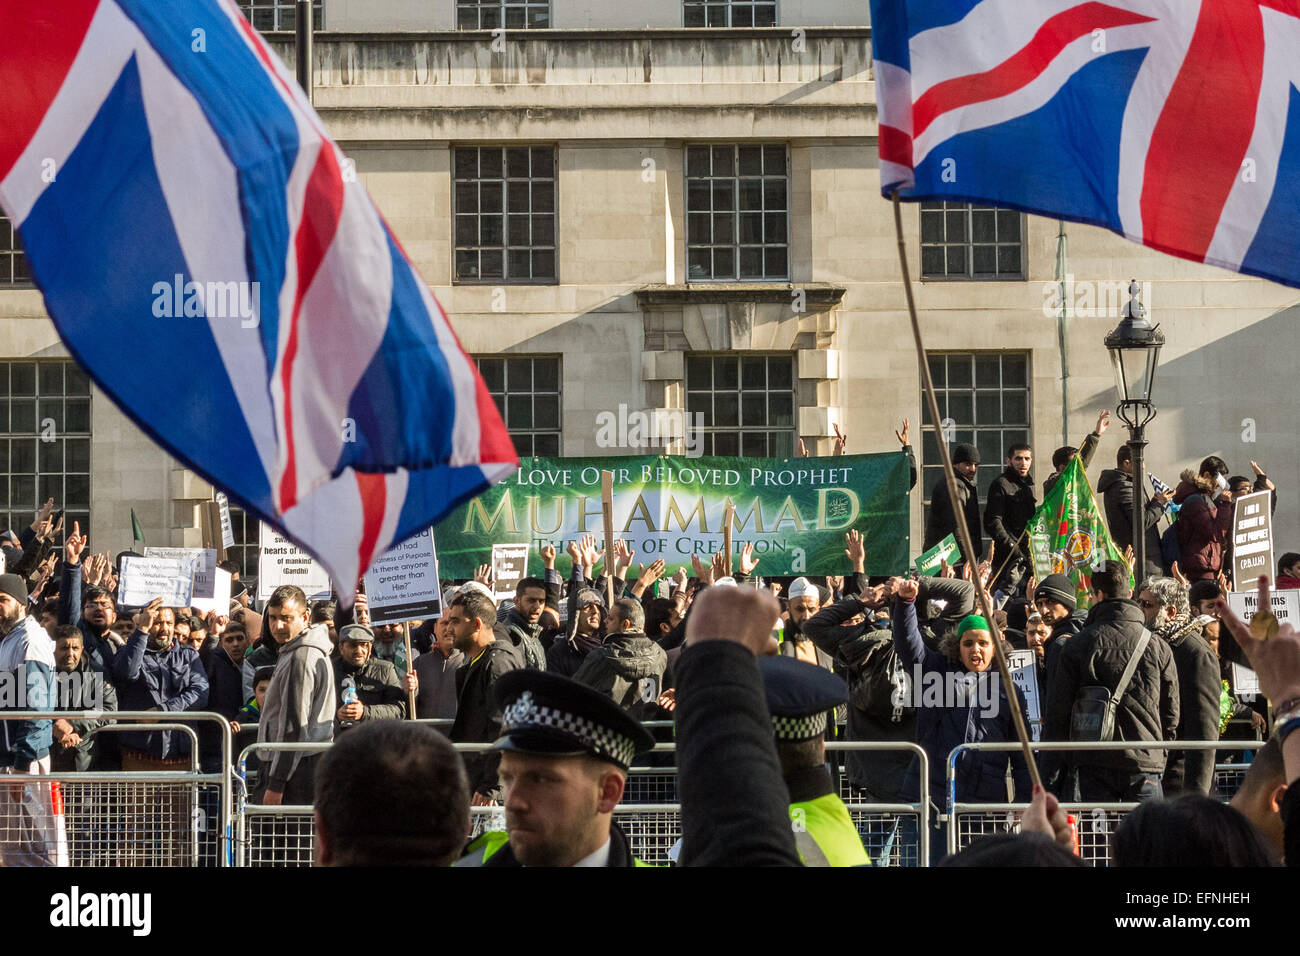 London, UK. 8. Februar 2015. Britain First Gruppe Counter Protest muslimische Demonstration Credit: Guy Corbishley/Alamy Live News Stockfoto